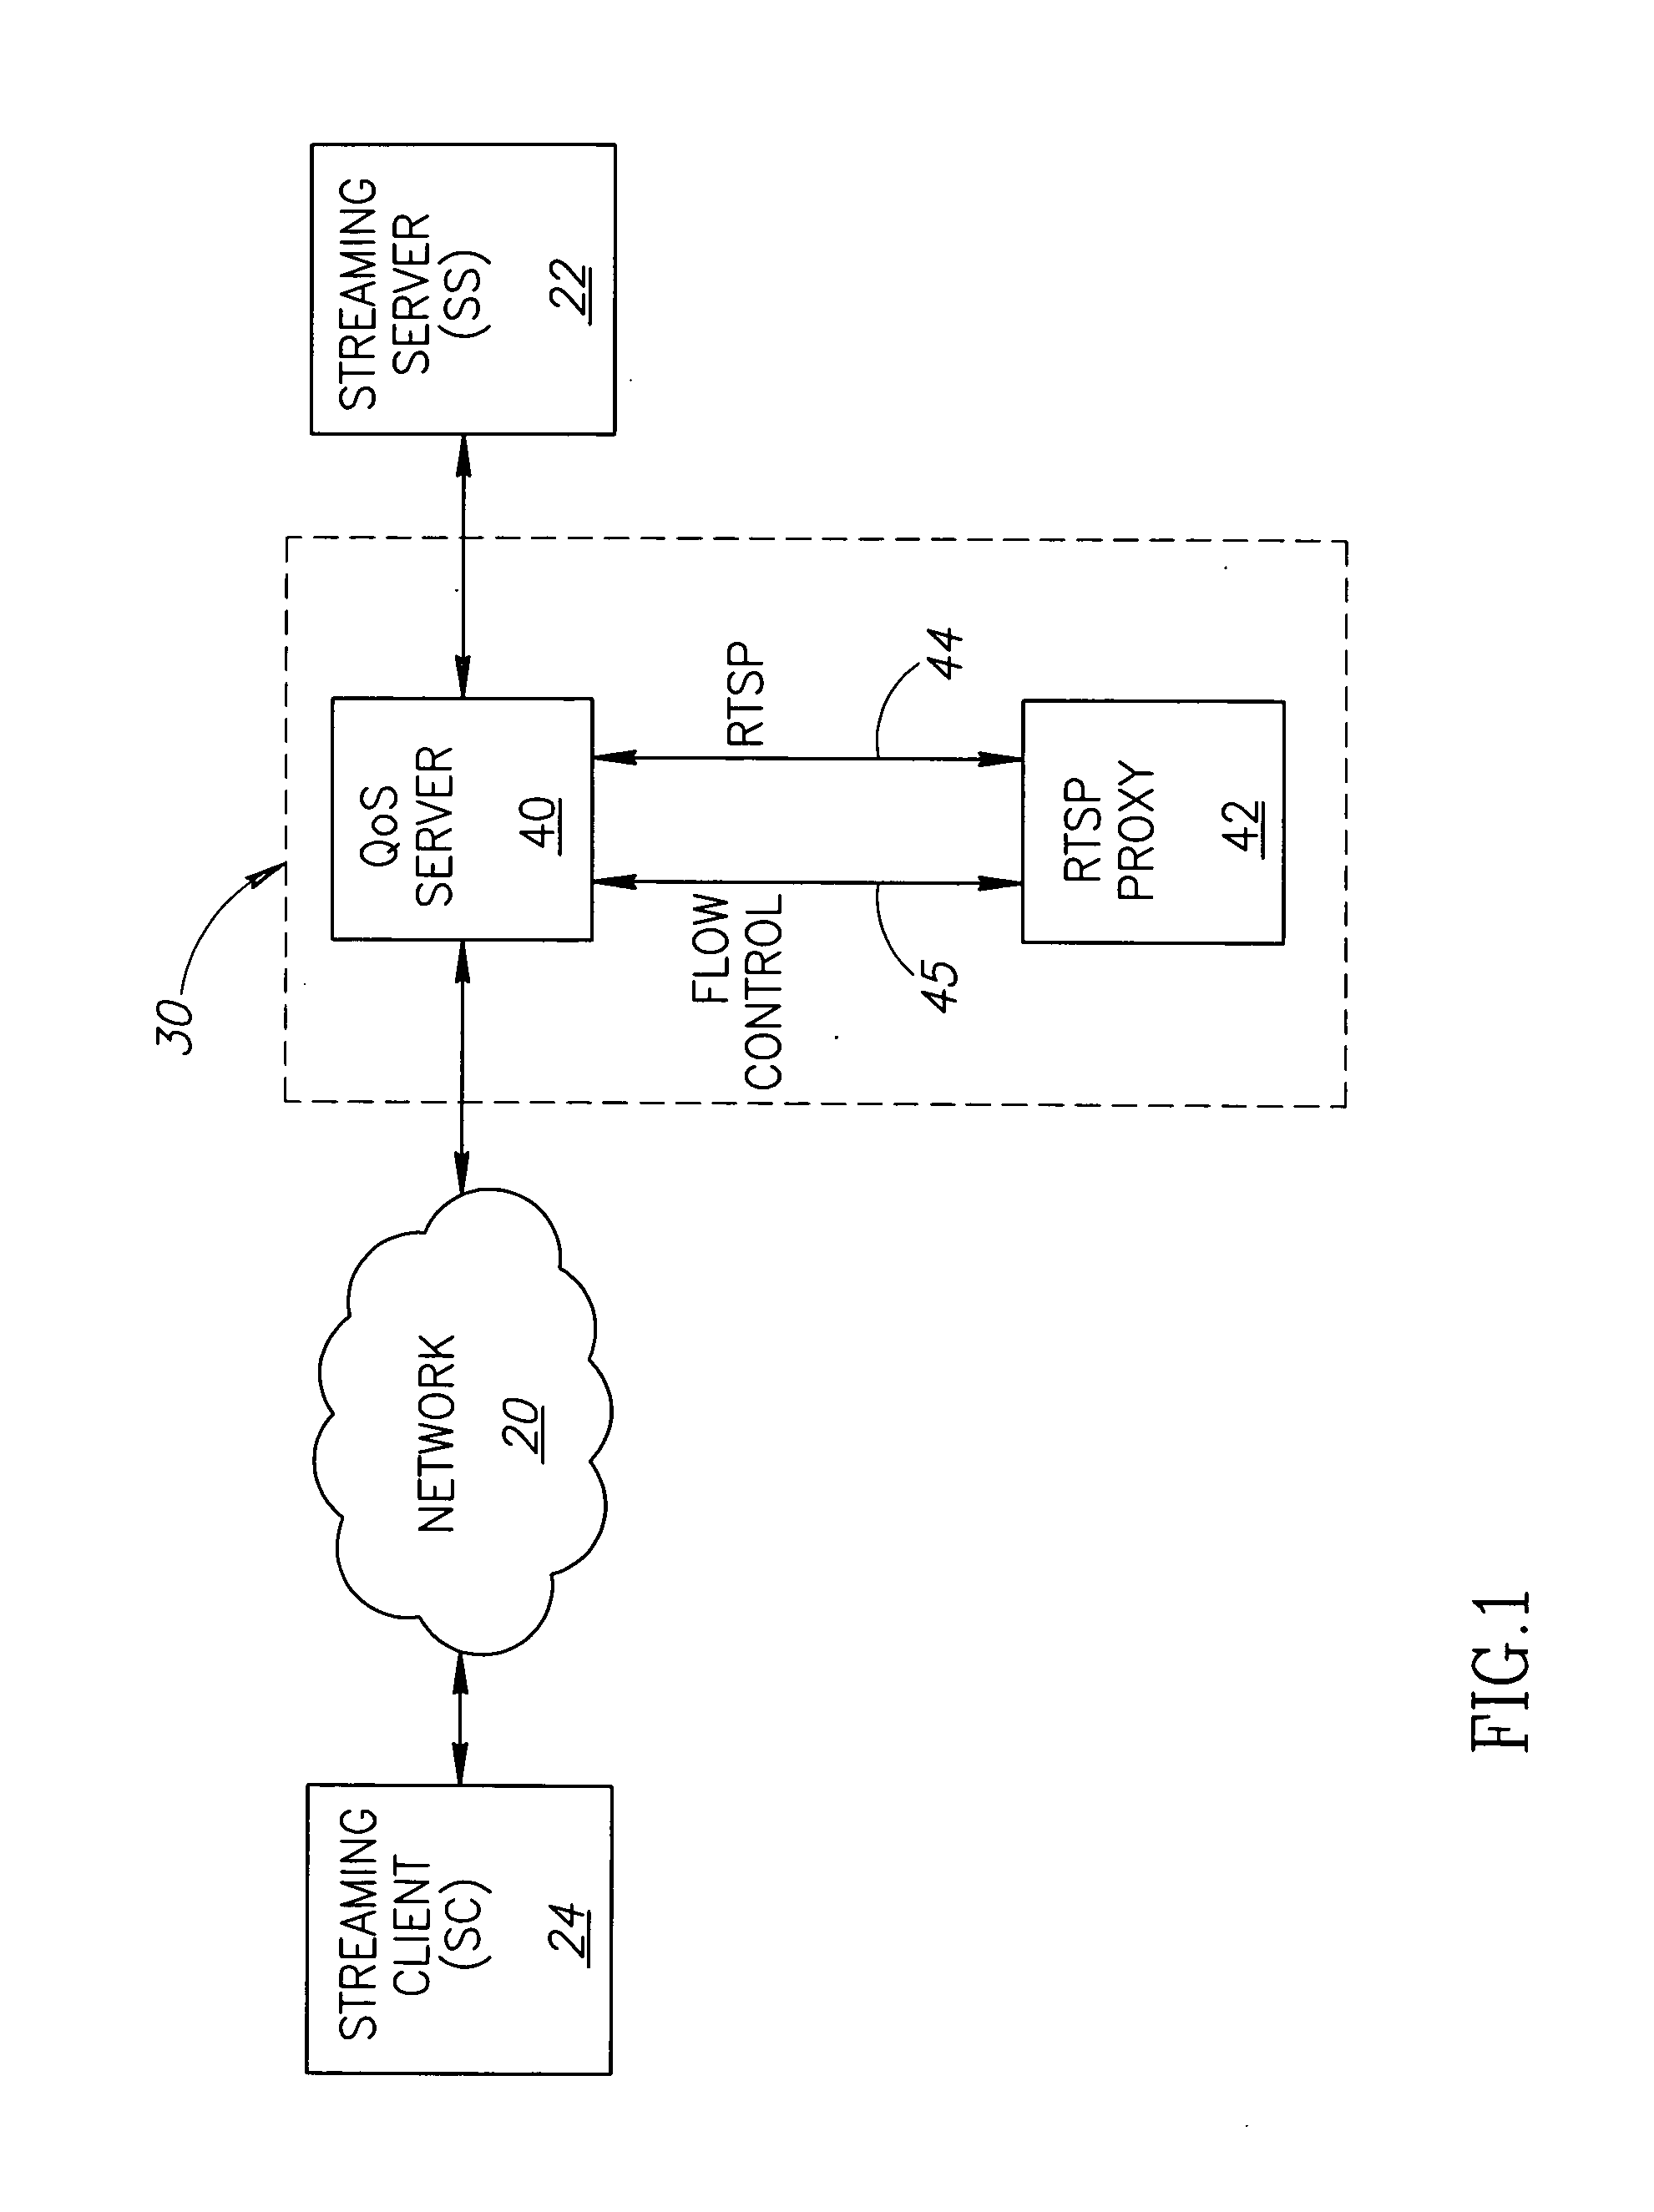 Real Time Streaming Protocol (RTSP) proxy system and method for its use